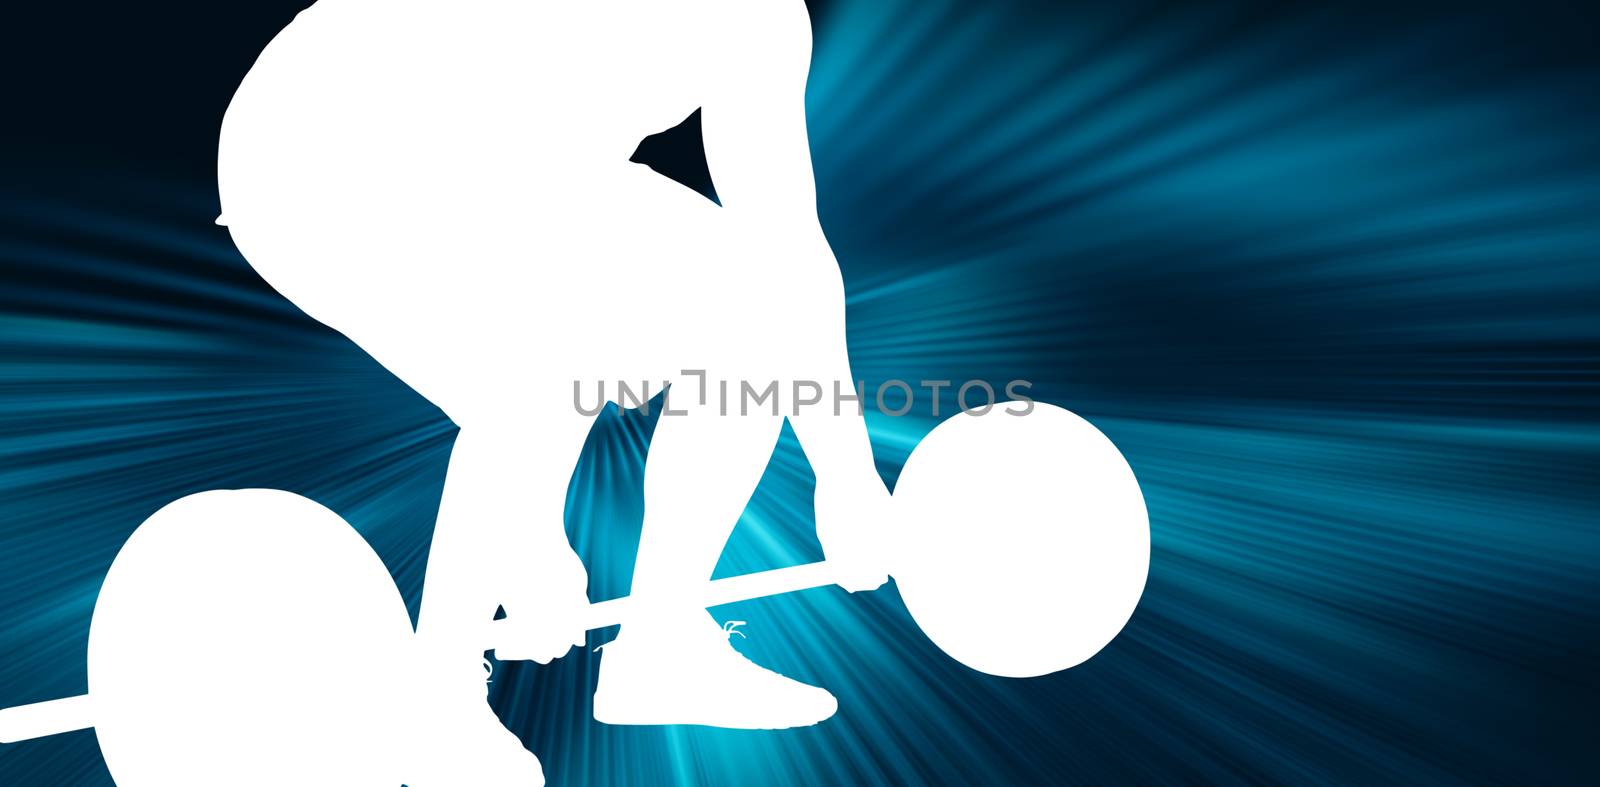 Bodybuilder lifting heavy barbell weights against abstract background